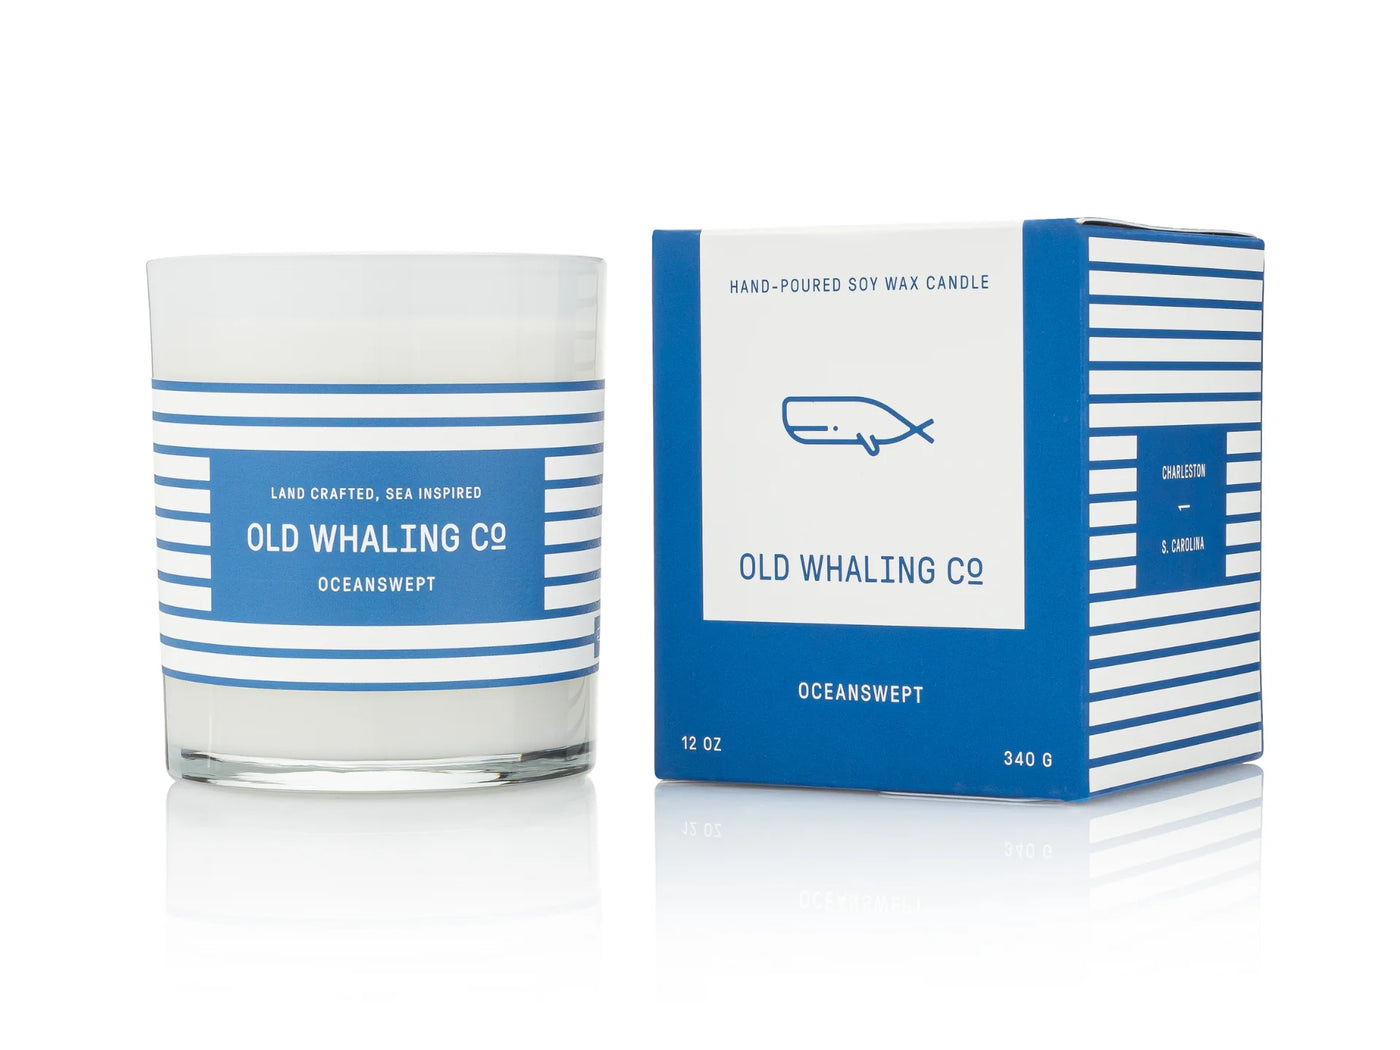 Old Whaling Co. Oceanswept Candle